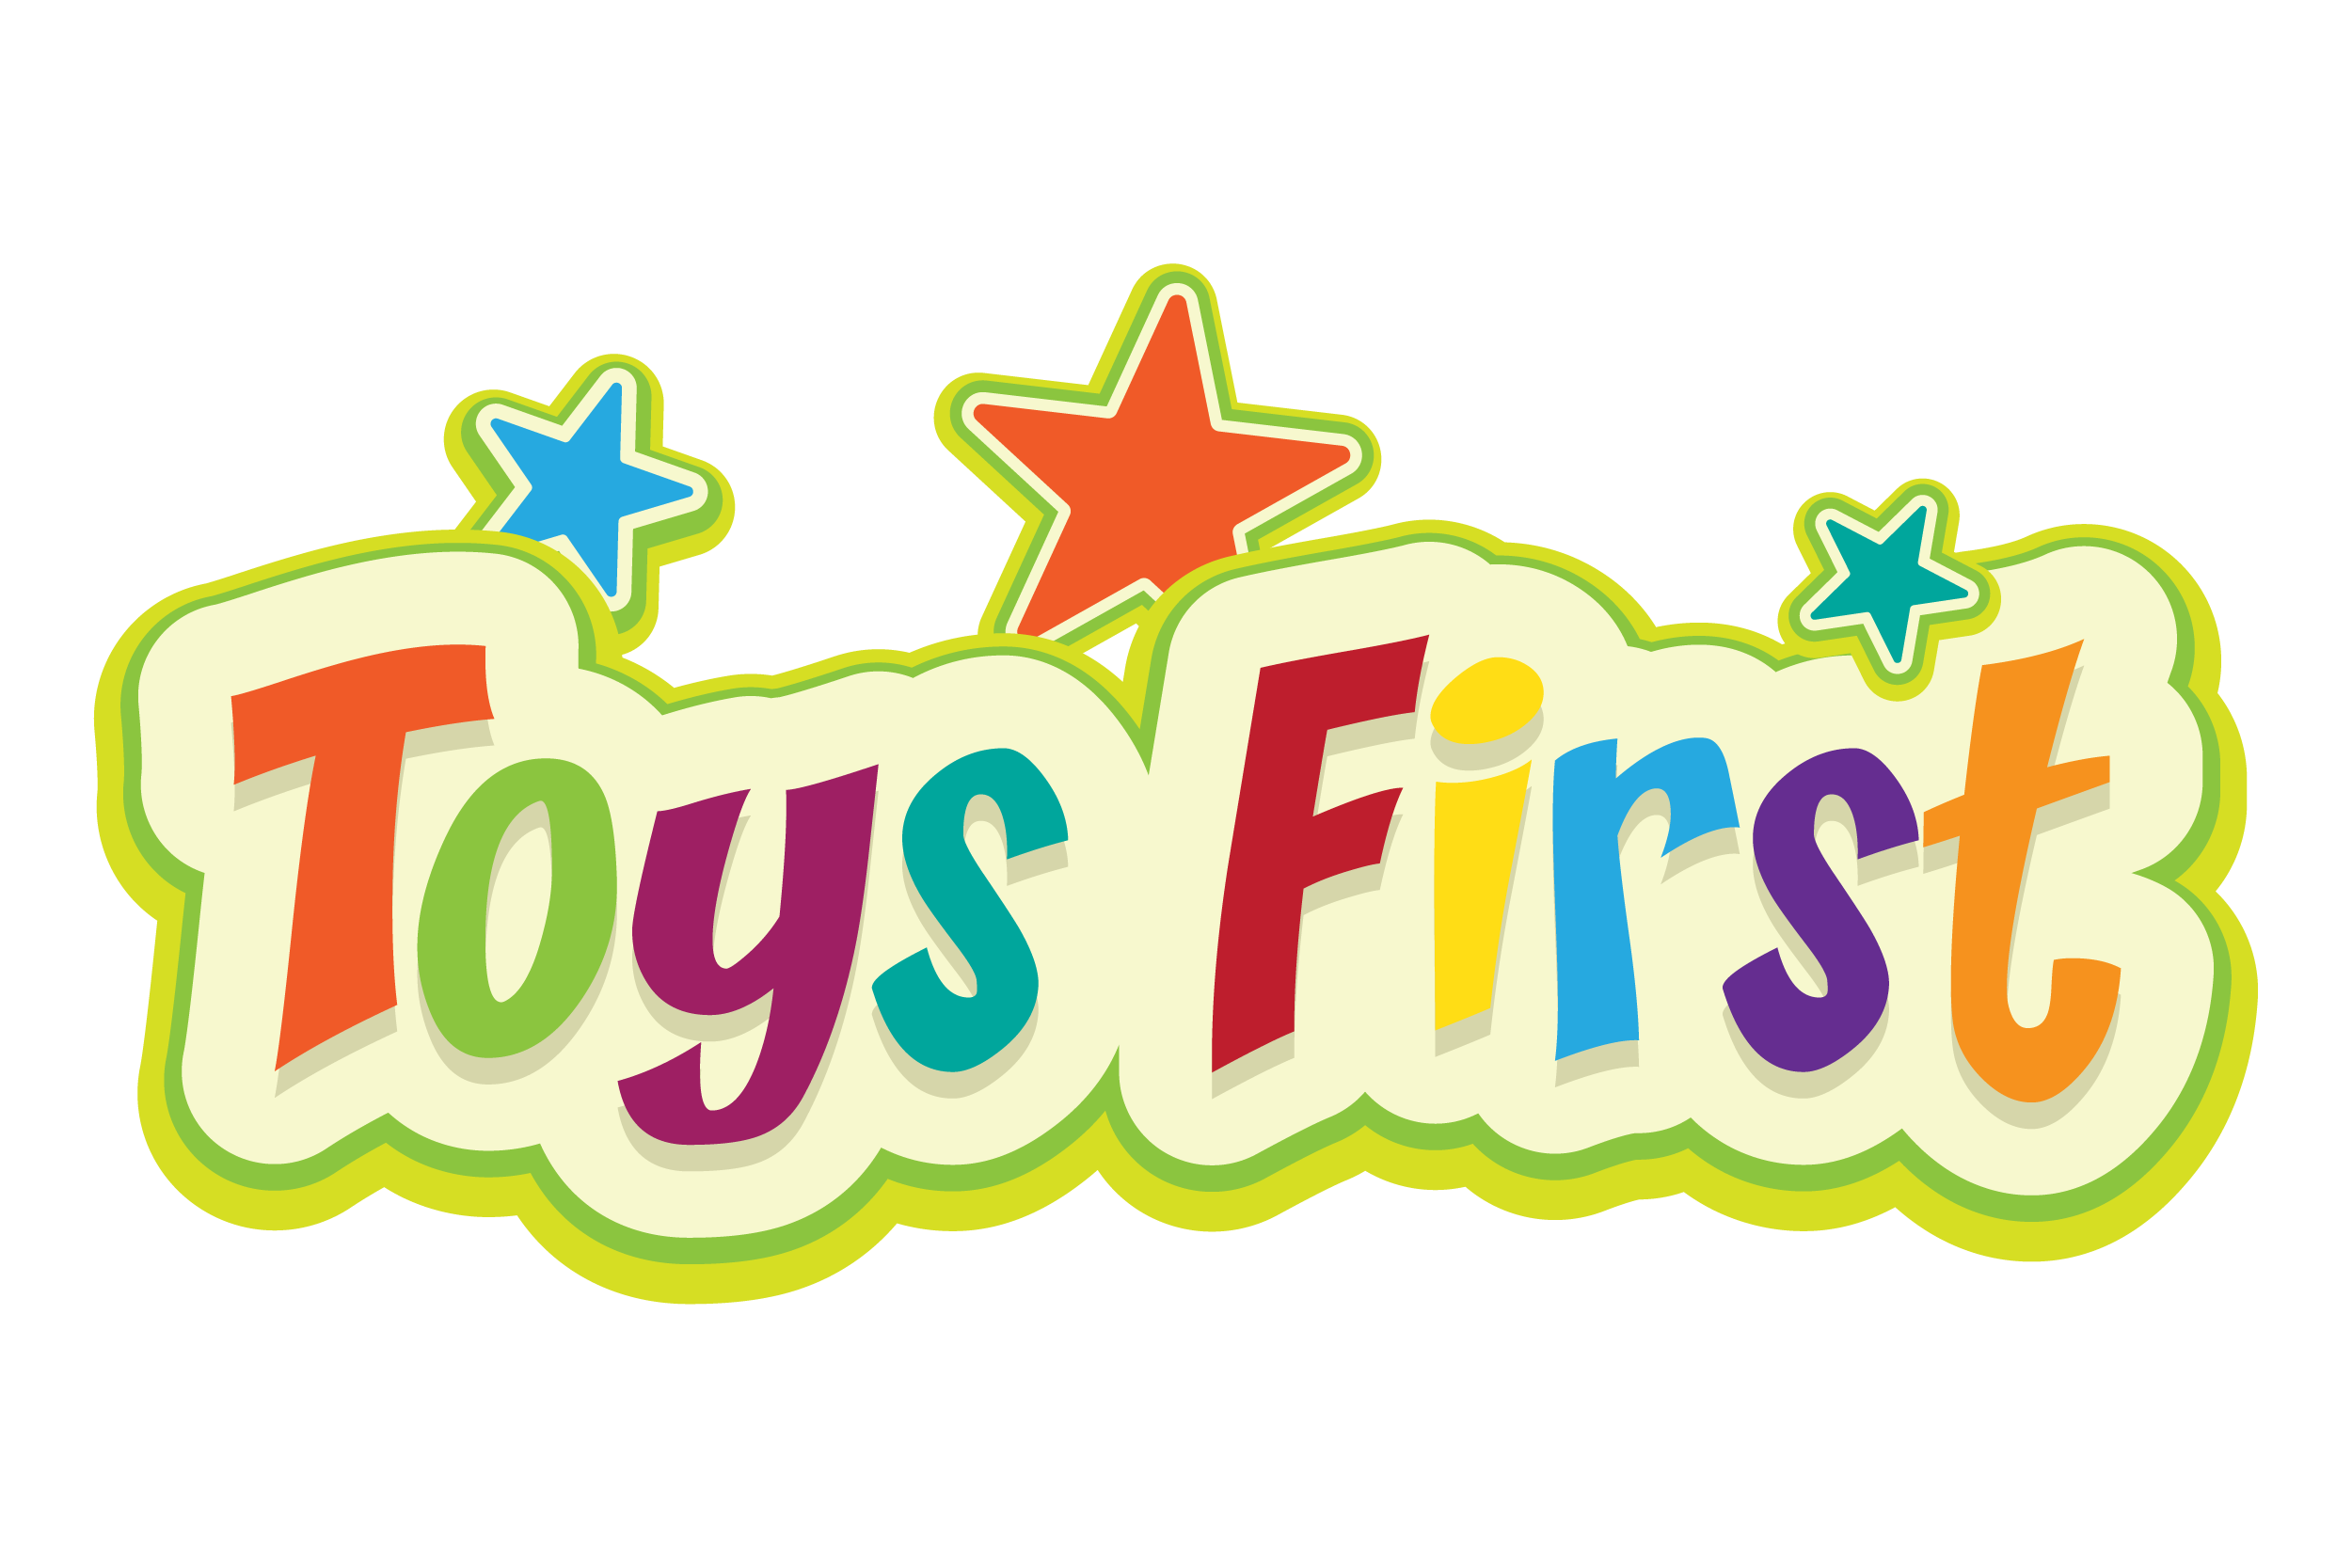 Toys First